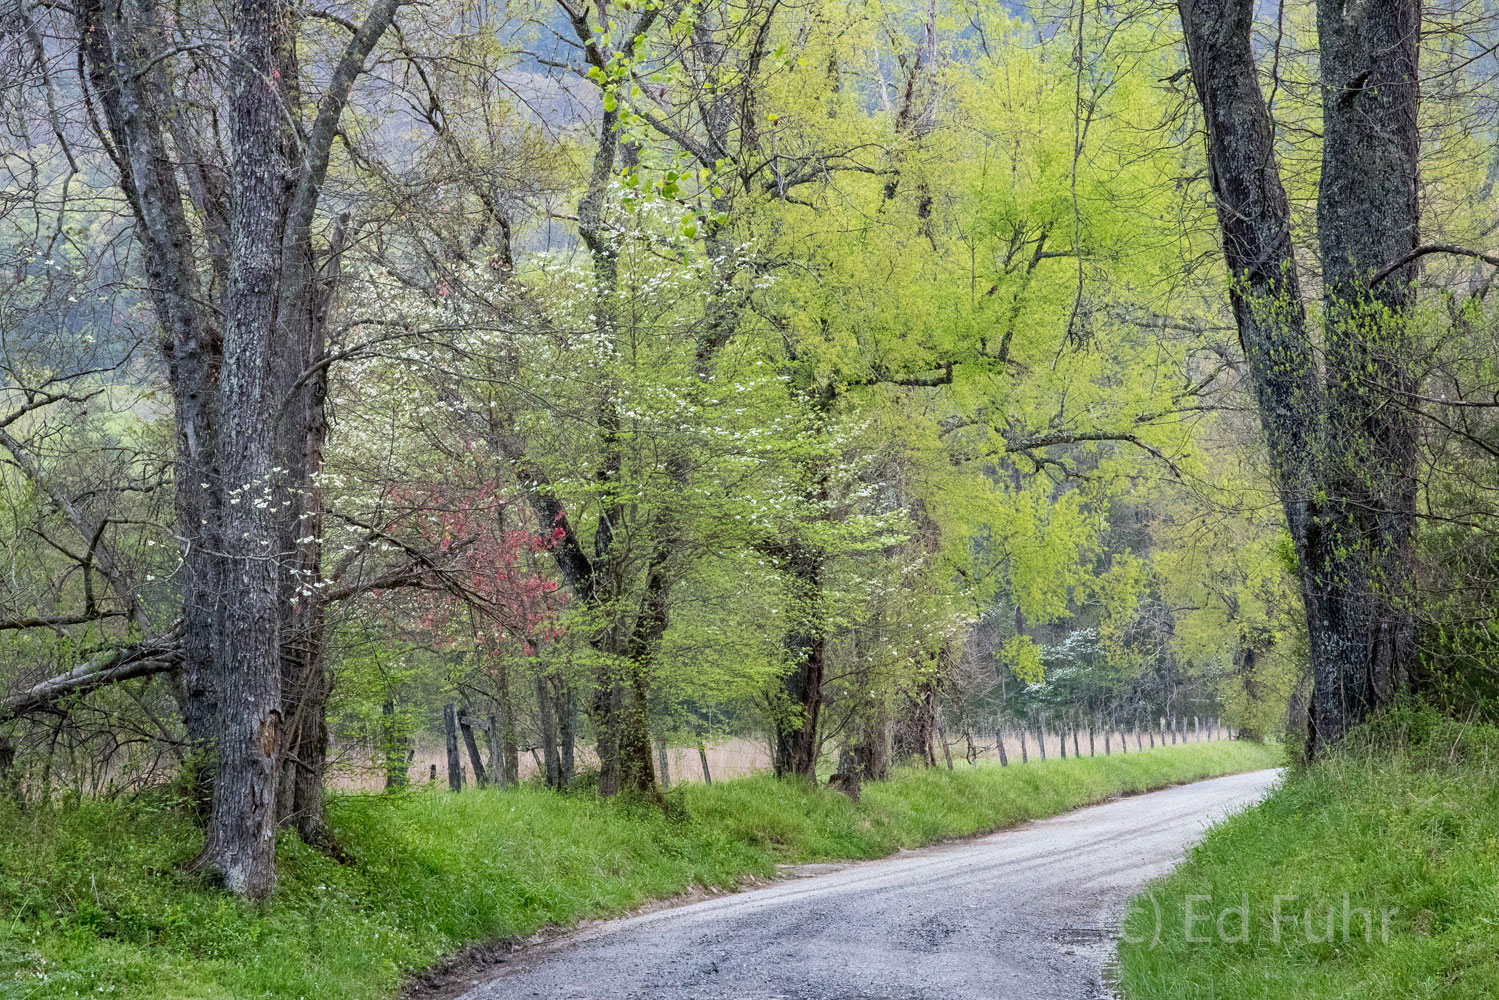 Dogwoods bloom and sprng's tender leaves emerge on the cherries, walnuts and oaks that lines Spark's Lane in Cades Cove.